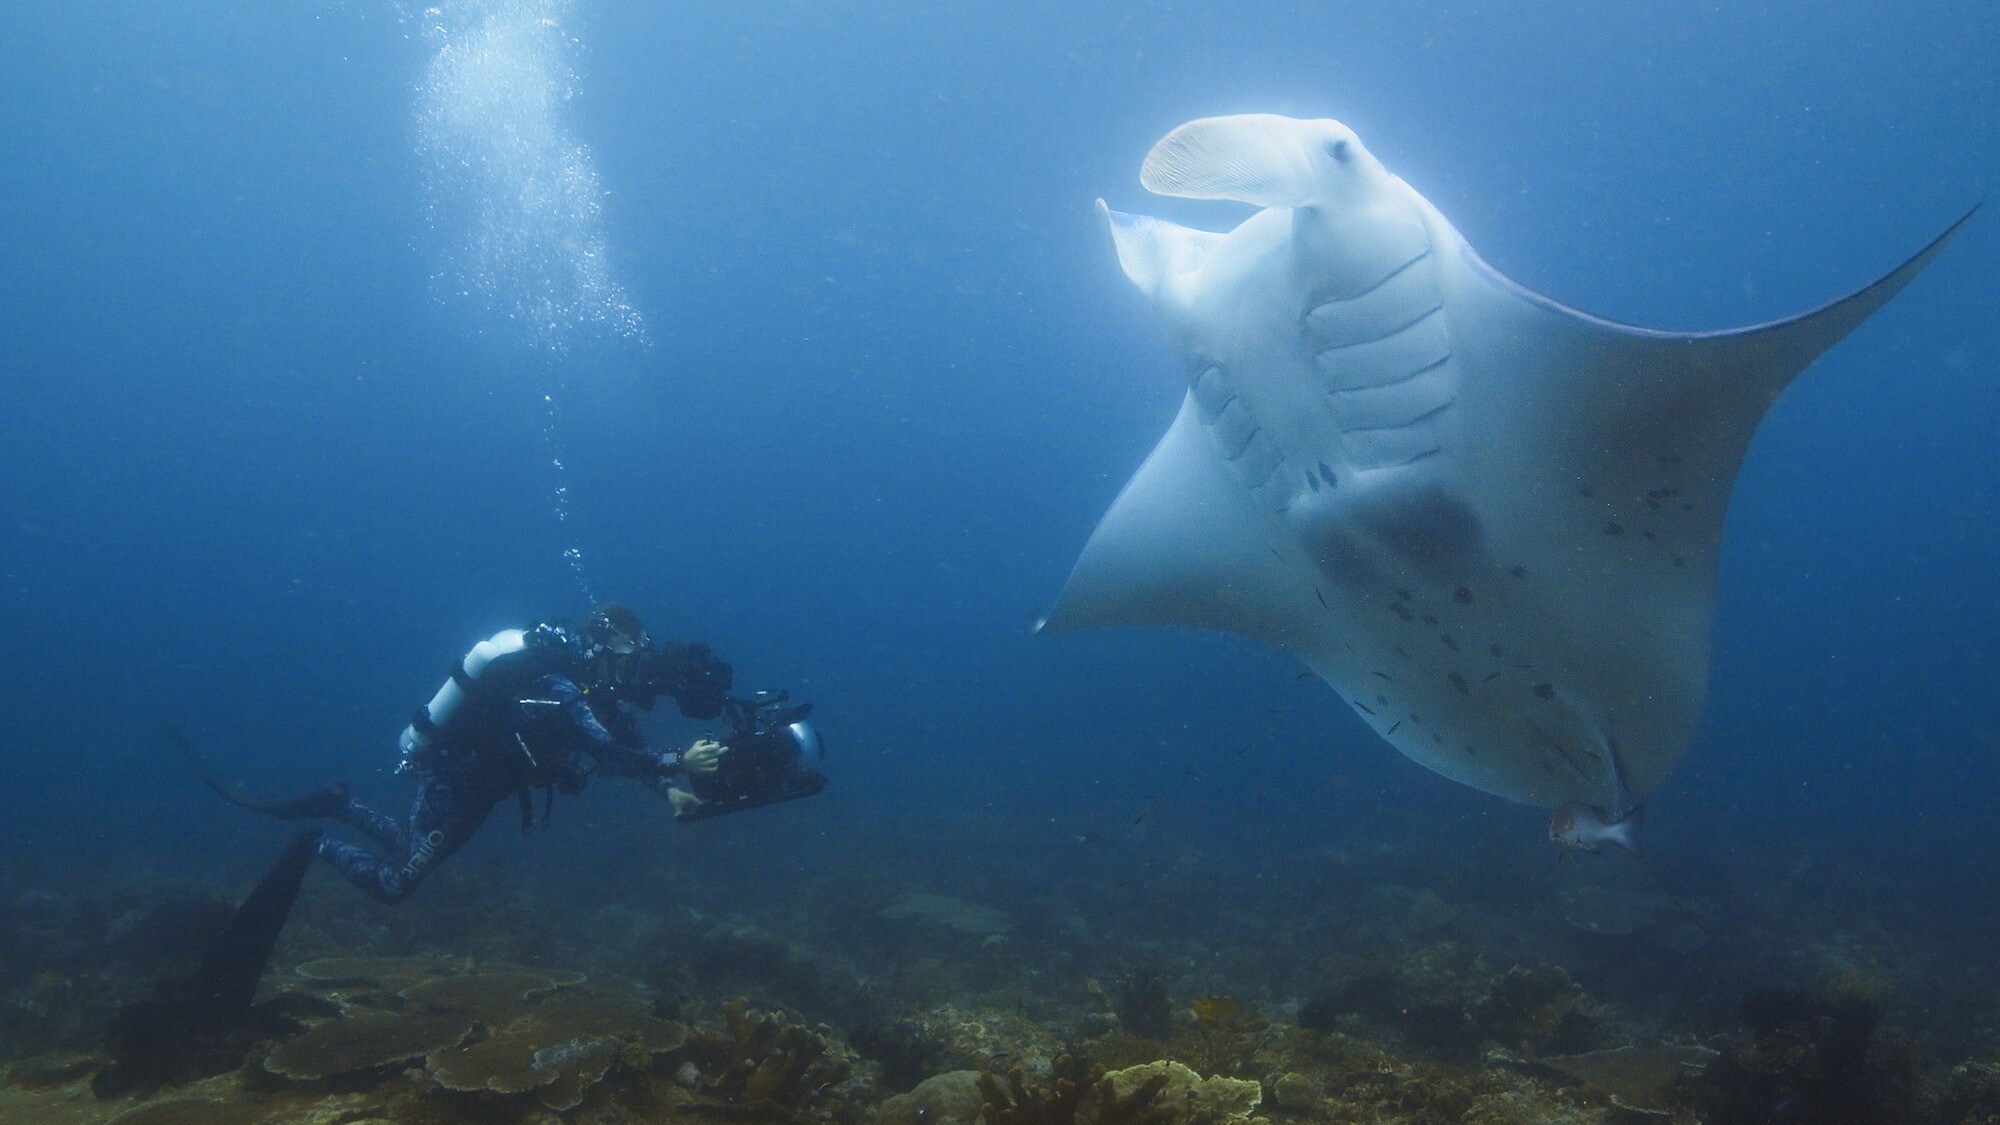 Bertie Gregory filming a Ray. (National Geographic for Disney+/Dan Beecham)